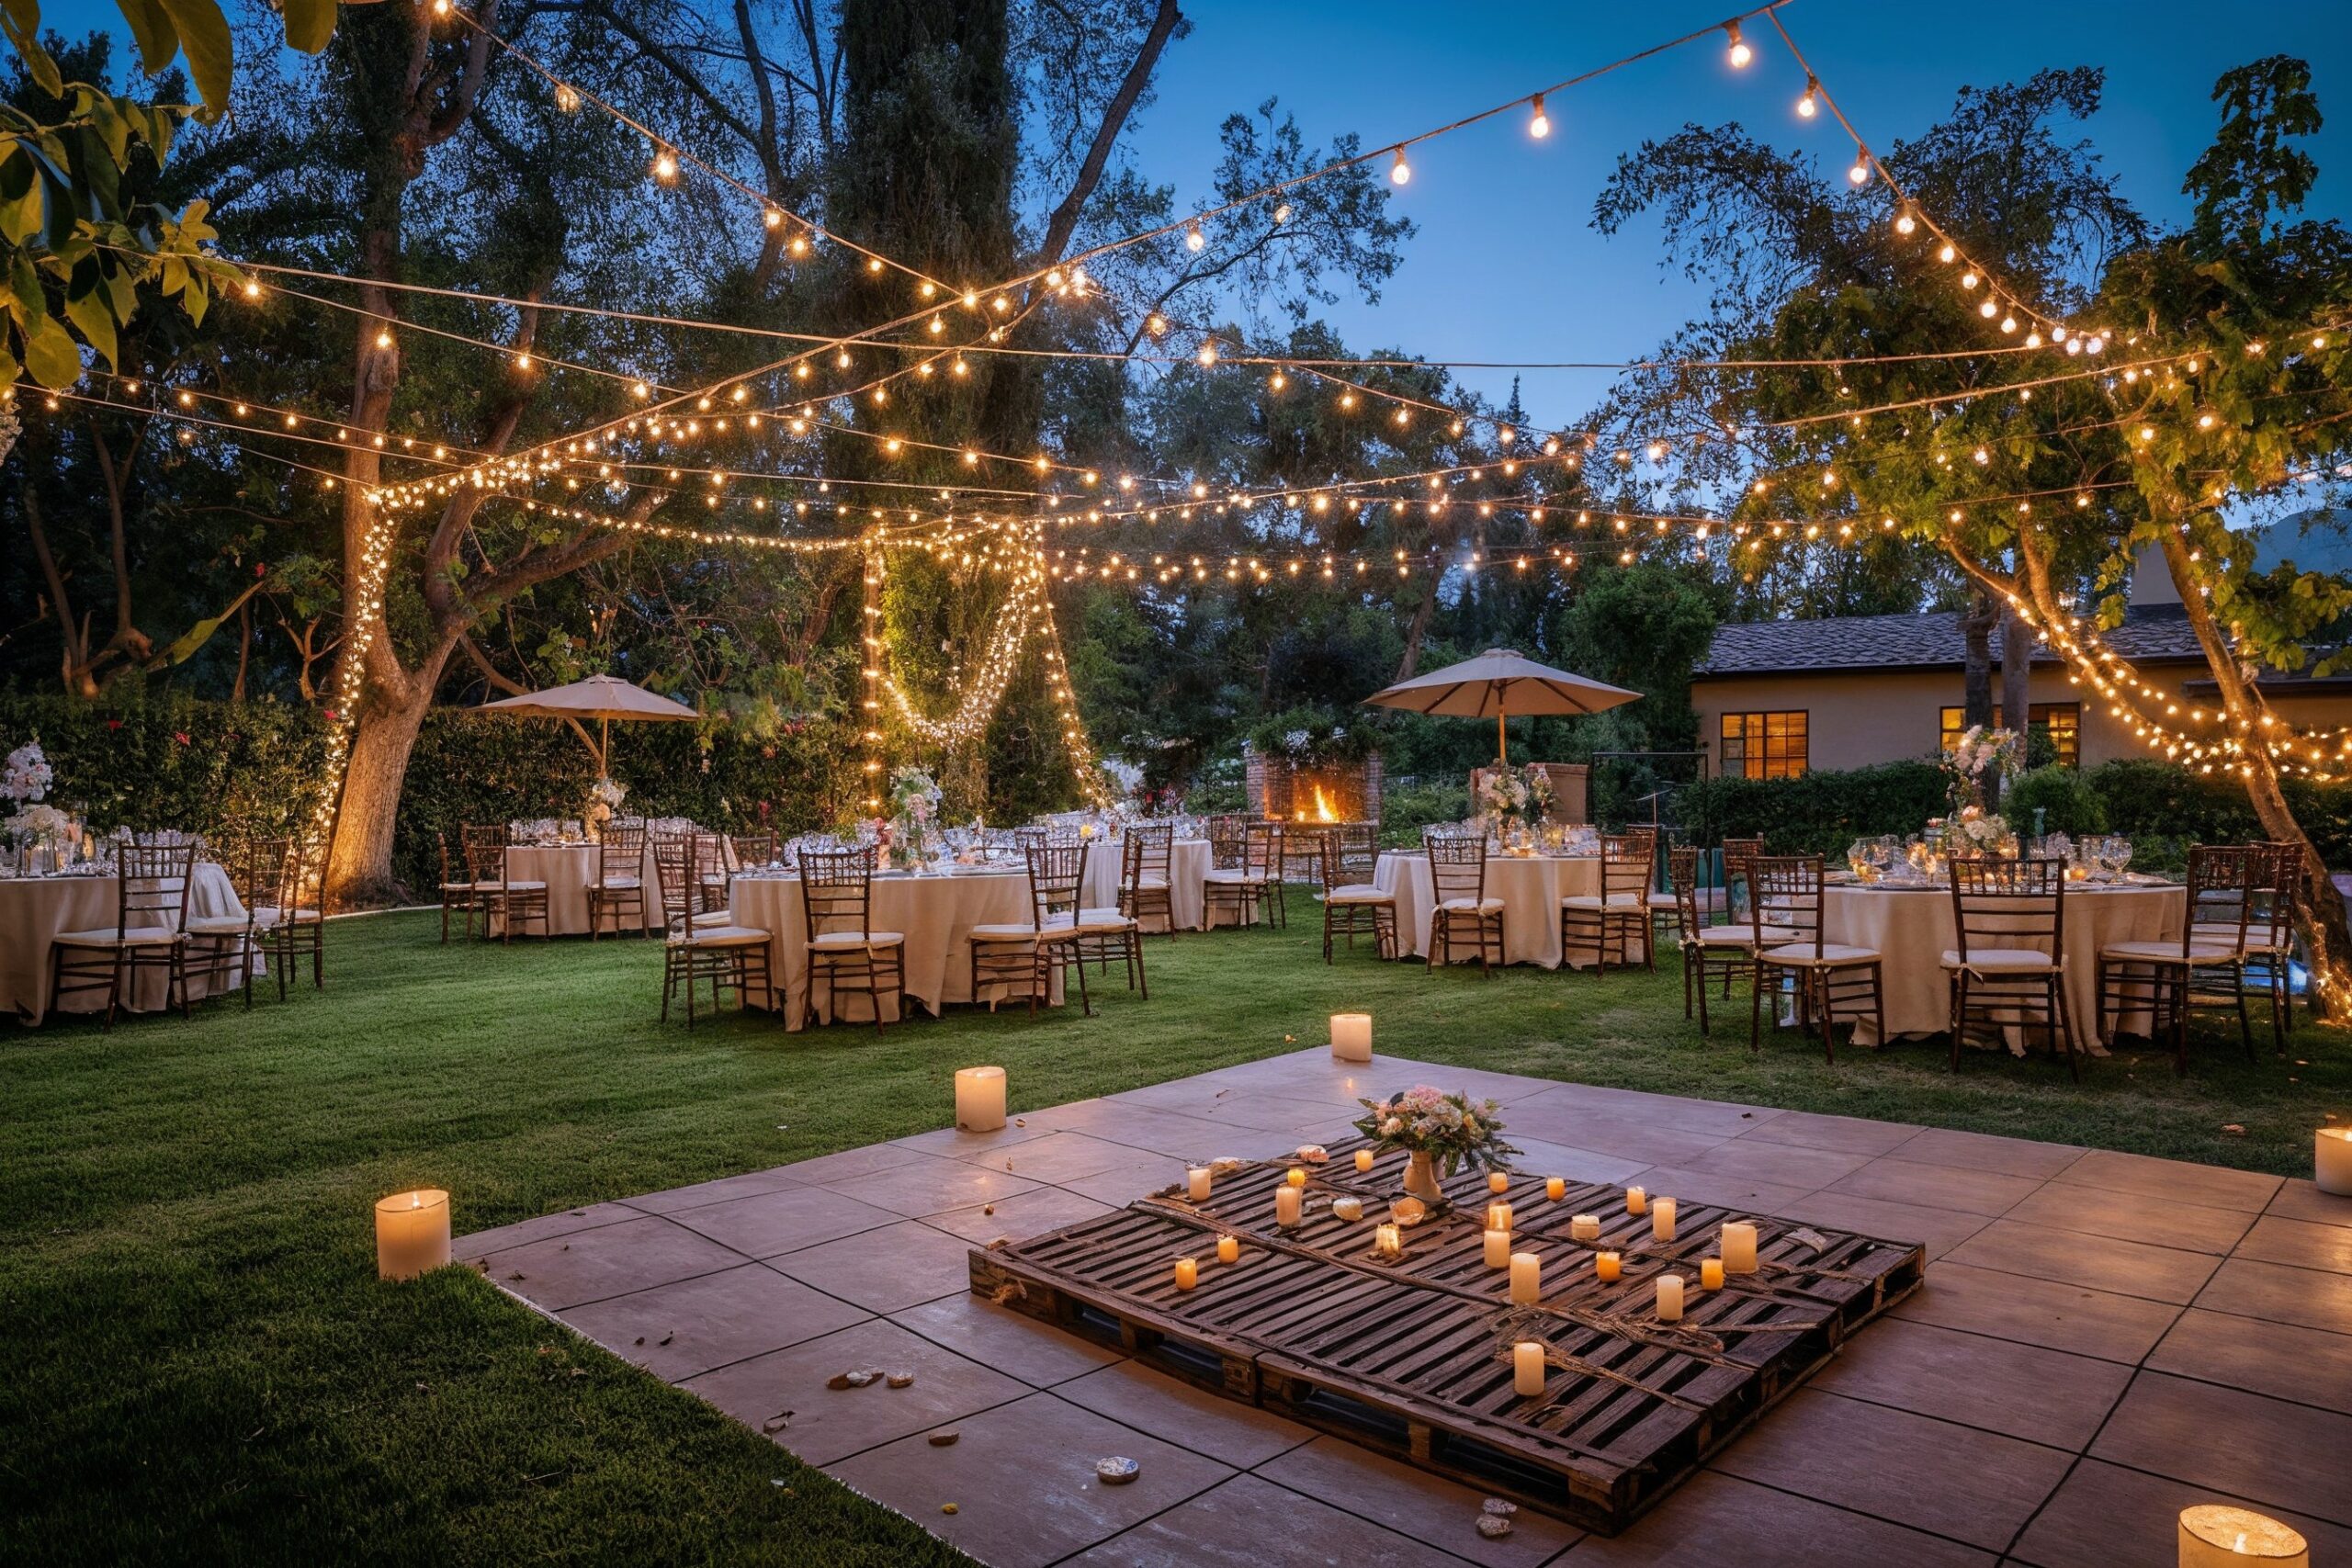 Outdoor evening event setup with round tables, white tablecloths, chairs, and string lights overhead. Lit candles are arranged on the ground, creating a warm ambiance. Trees and greenery surround the area.